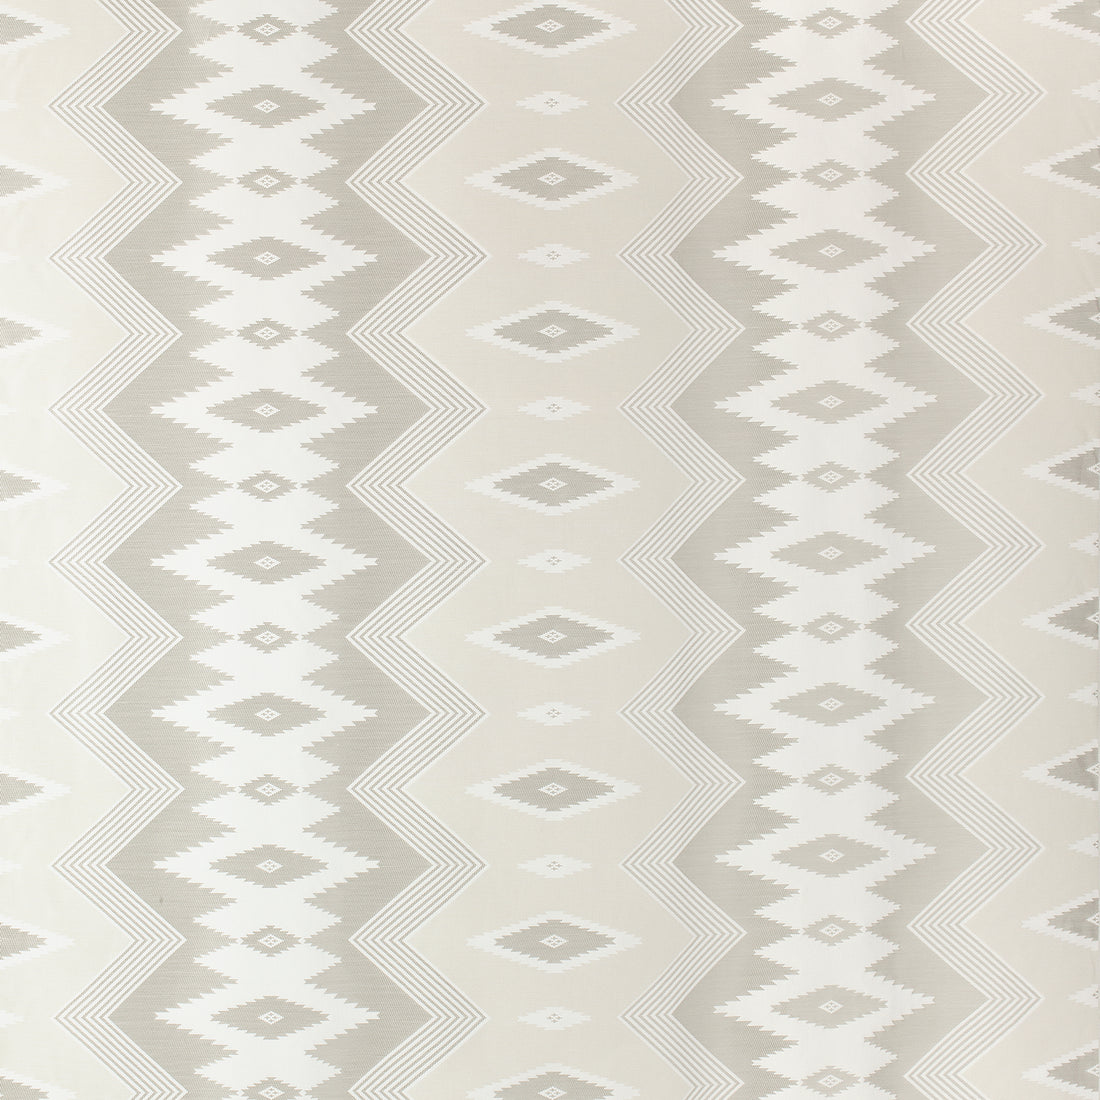 Kantha fabric in cream color - pattern number AW73030 - by Anna French in the Meridian collection